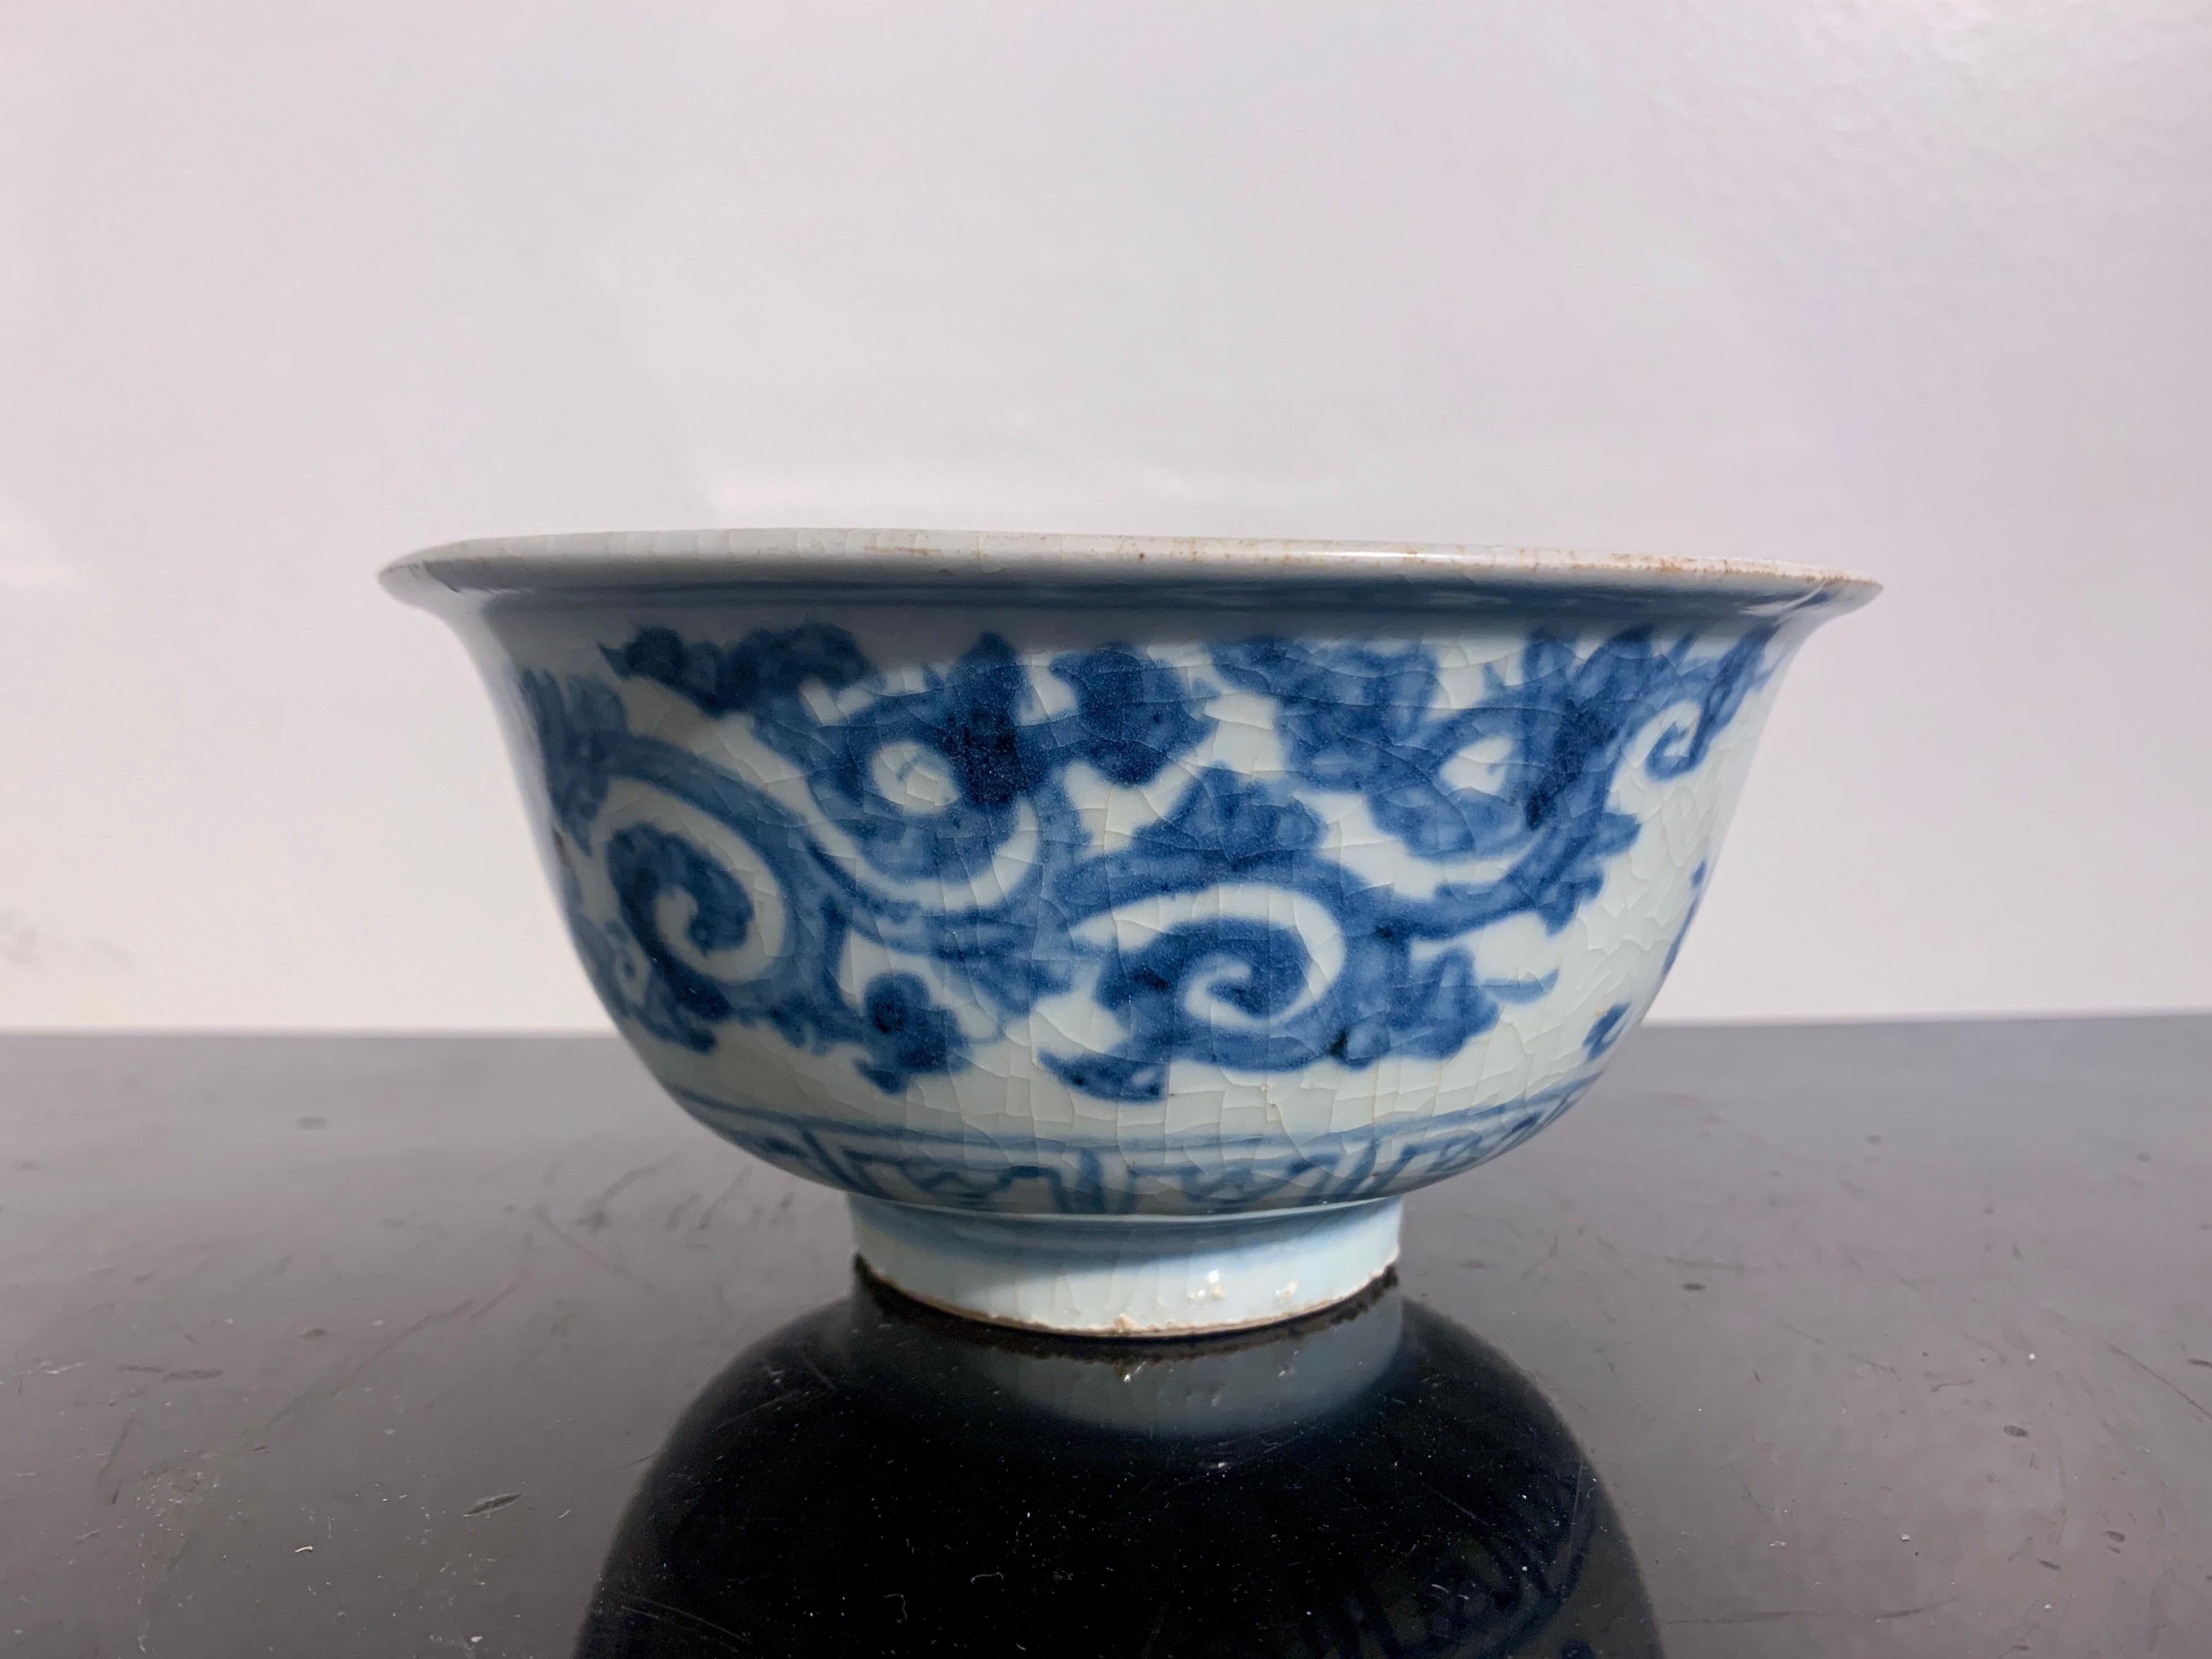 A rare Chinese Ming Dynasty blue and white porcelain bowl made for the Tibetan market, early Ming Dynasty, 15th/16th century, China.

The blue and white porcelain bowl of standard form, raised on a short, recessed foot, with high walls and a narrow